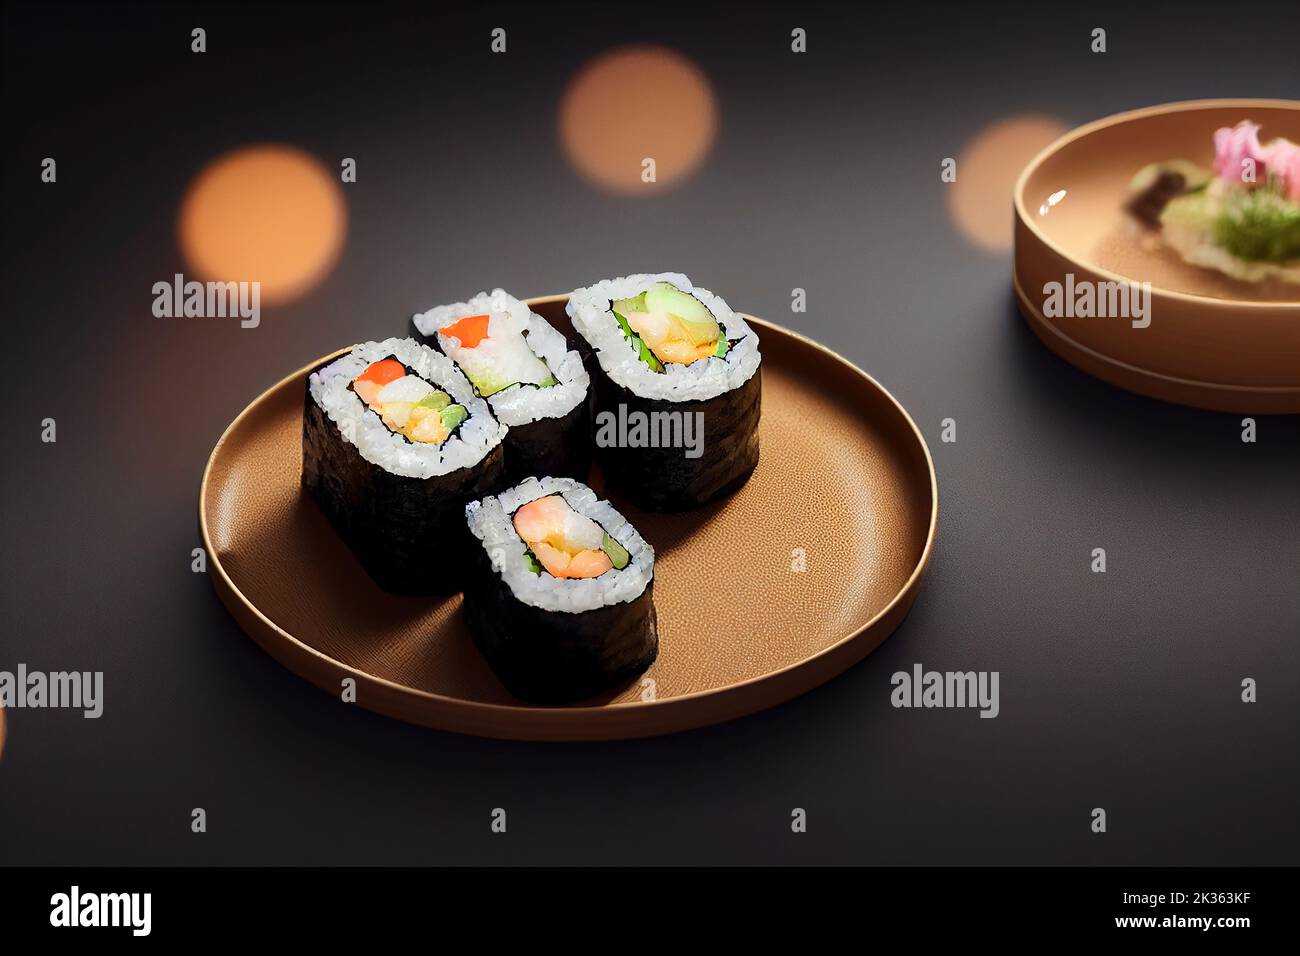 Beautifully plated sushi roll on a black background, dramatic lighting, food photography and illustration Stock Photo